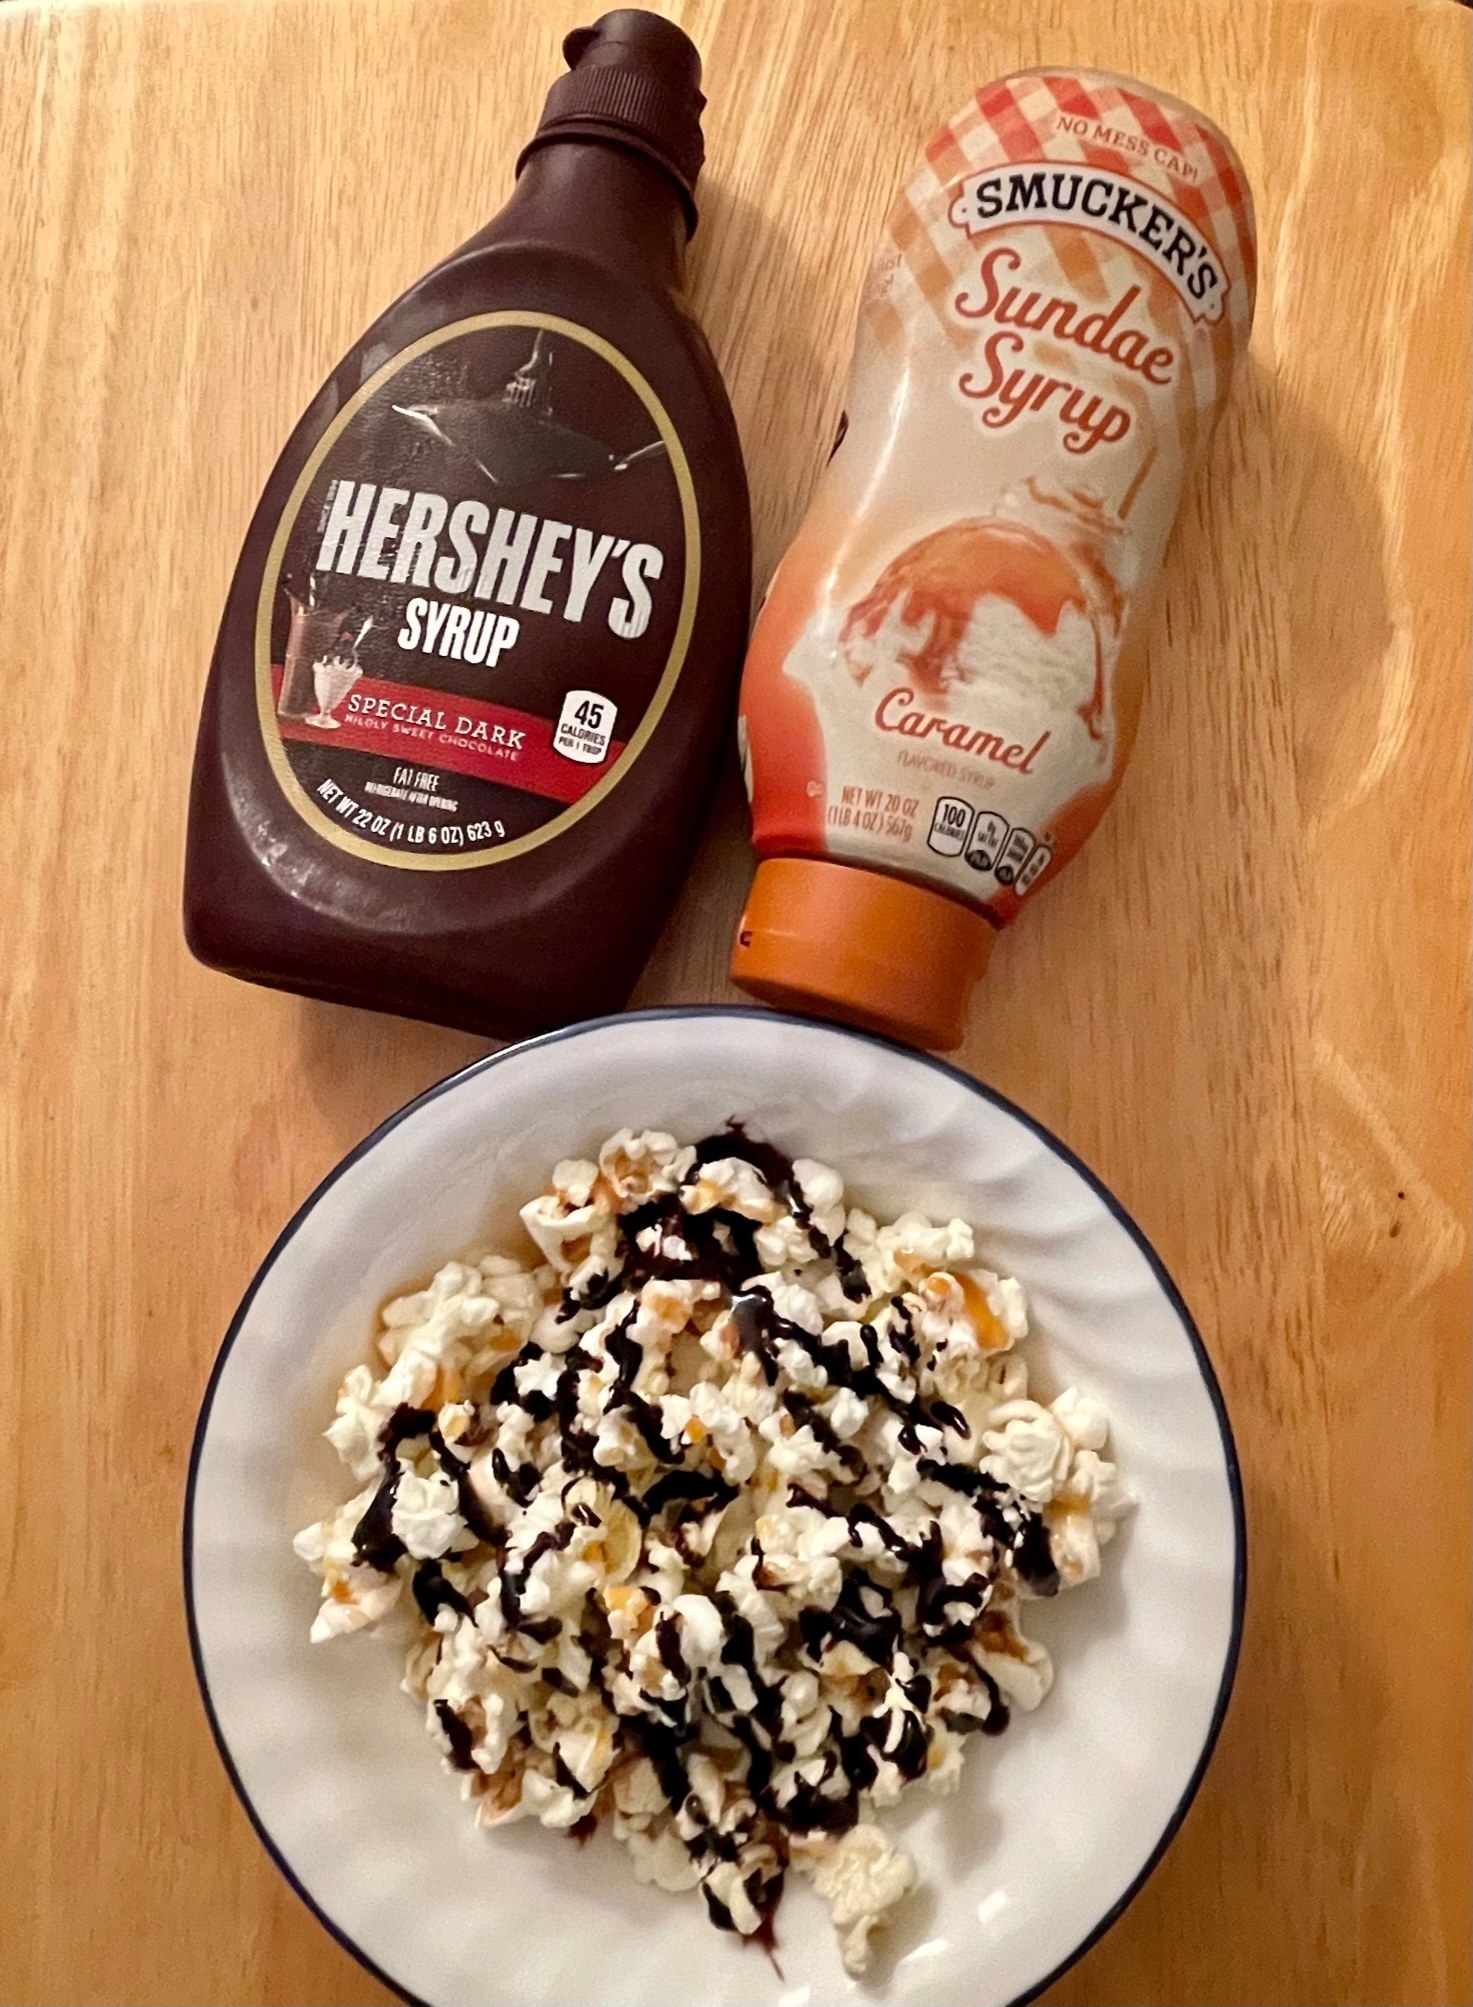 Popcorn with chocolate and caramel syrup